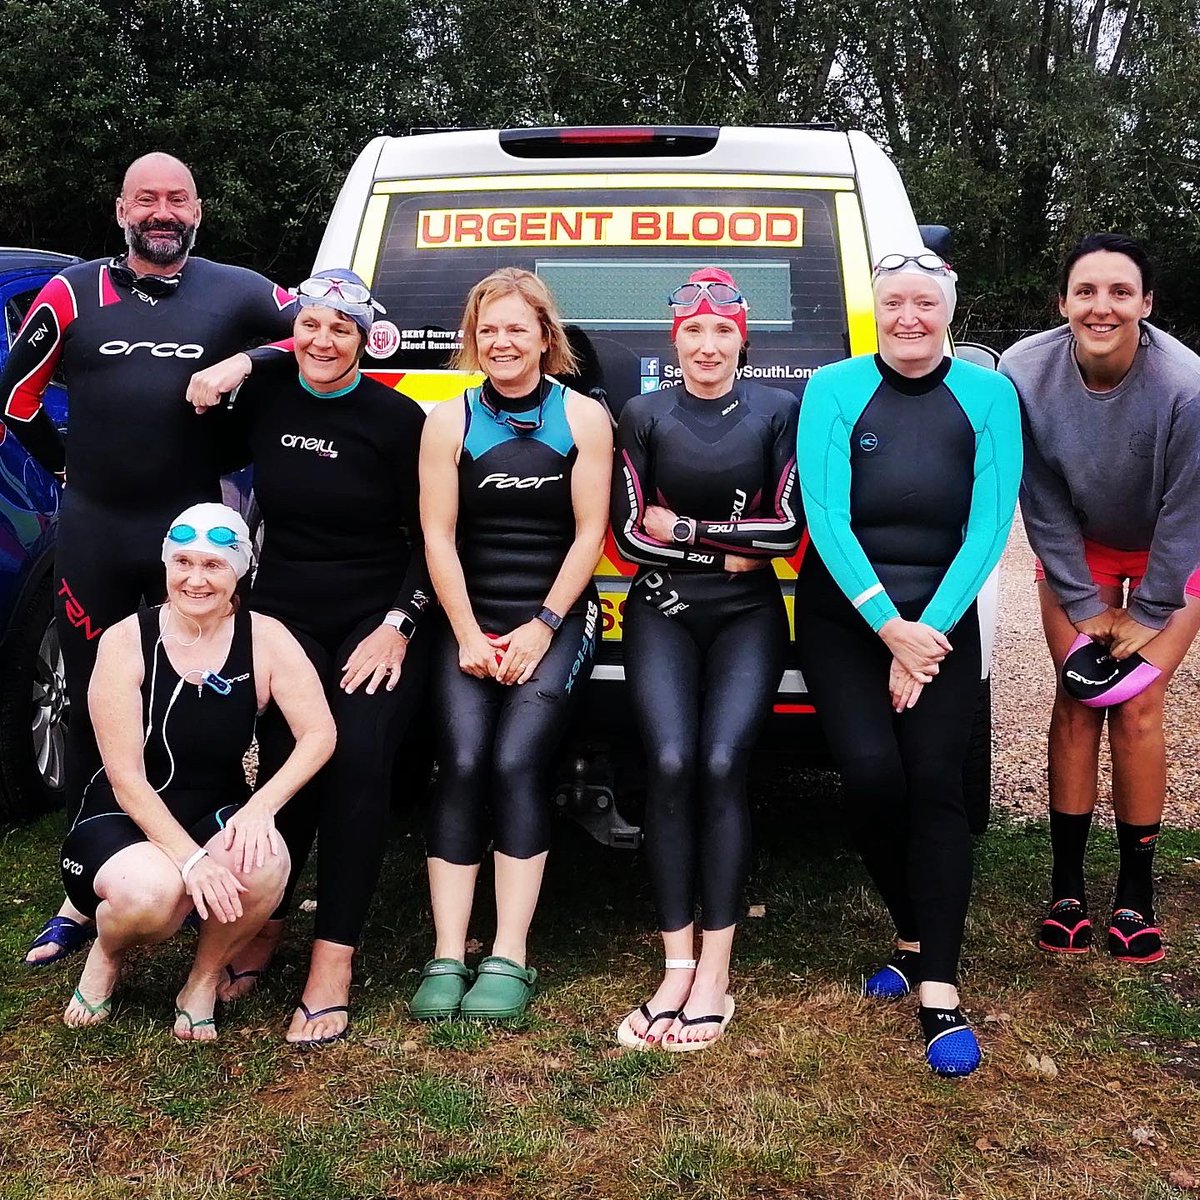 This is the amazing Jo and her friends who collectively swam just over 50km on Sunday, to raise over £1,185.00 for @SERV_SSL and @MakeAWishUK 🎉🏊🏽🏊🏼‍♀️🏊🏽‍♂️ #servsl #itswhatwedo #bloodbikes #bloodcars #landrover #notjustbikes #thankyou #fundraising #risingtothechallenge #openwaterswim